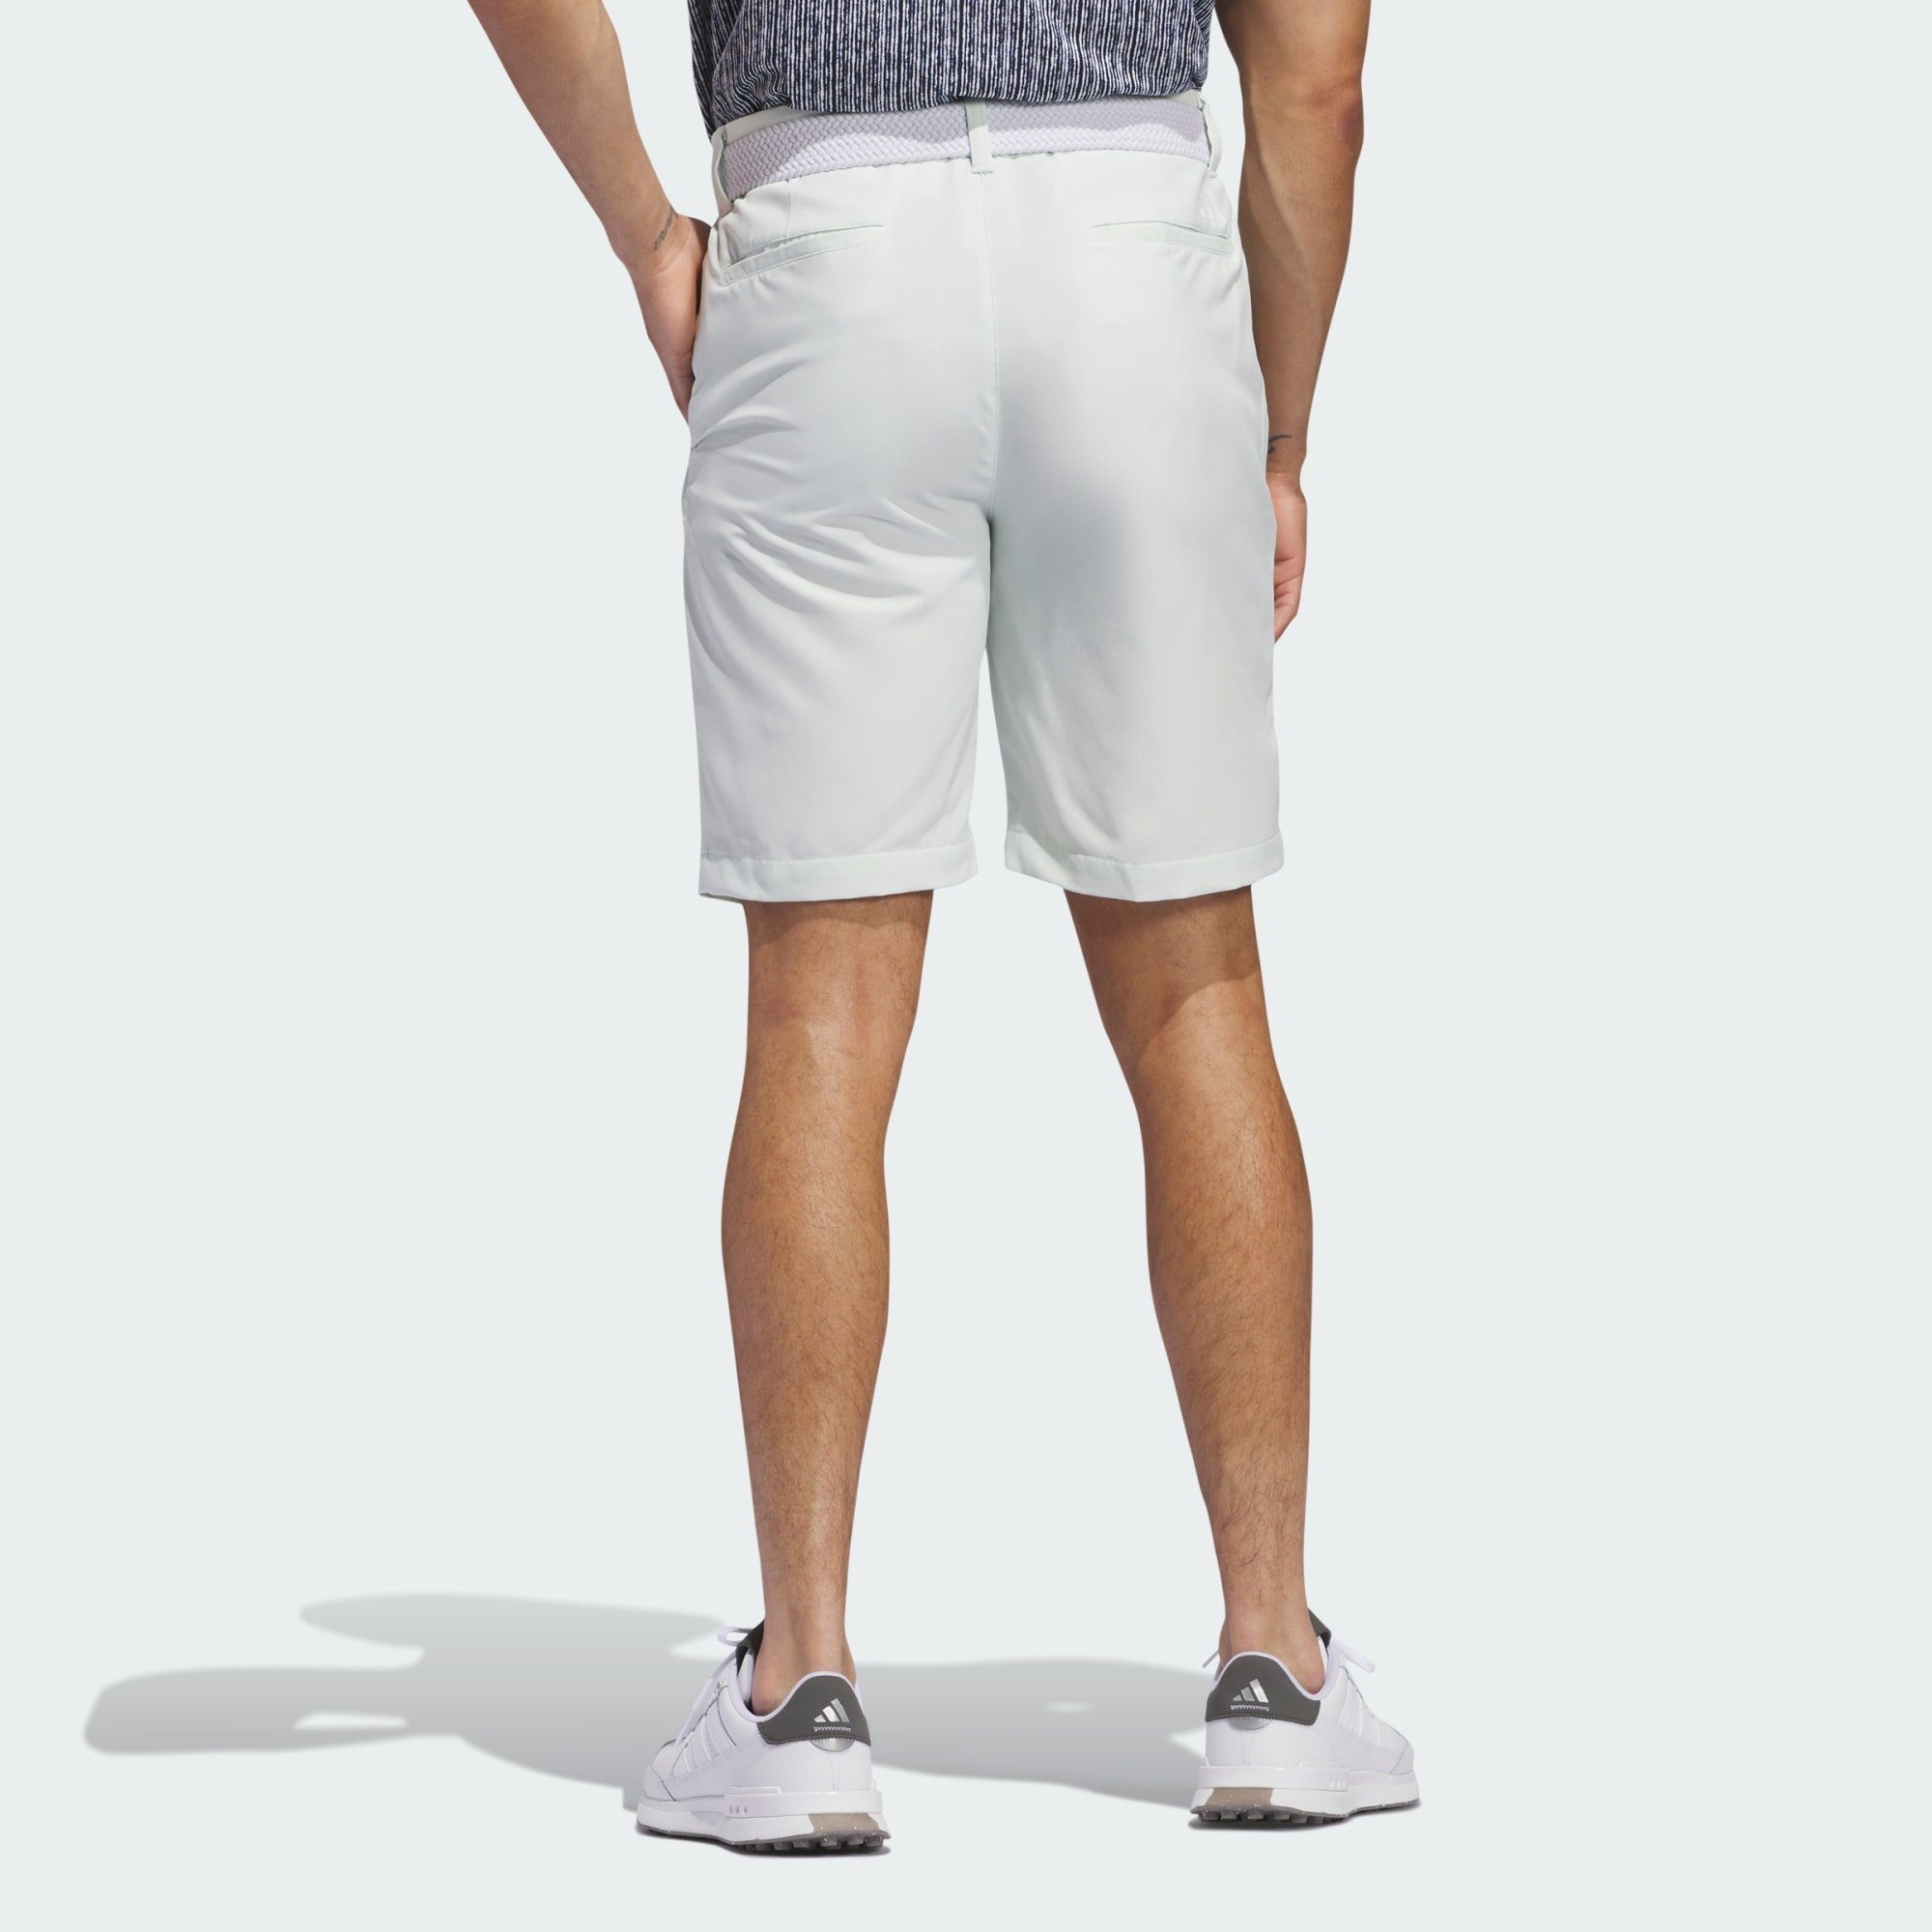 adidas Performance Funktionsshorts ULTIMATE365 8.5-INCH Jade Crystal SHORTS GOLF